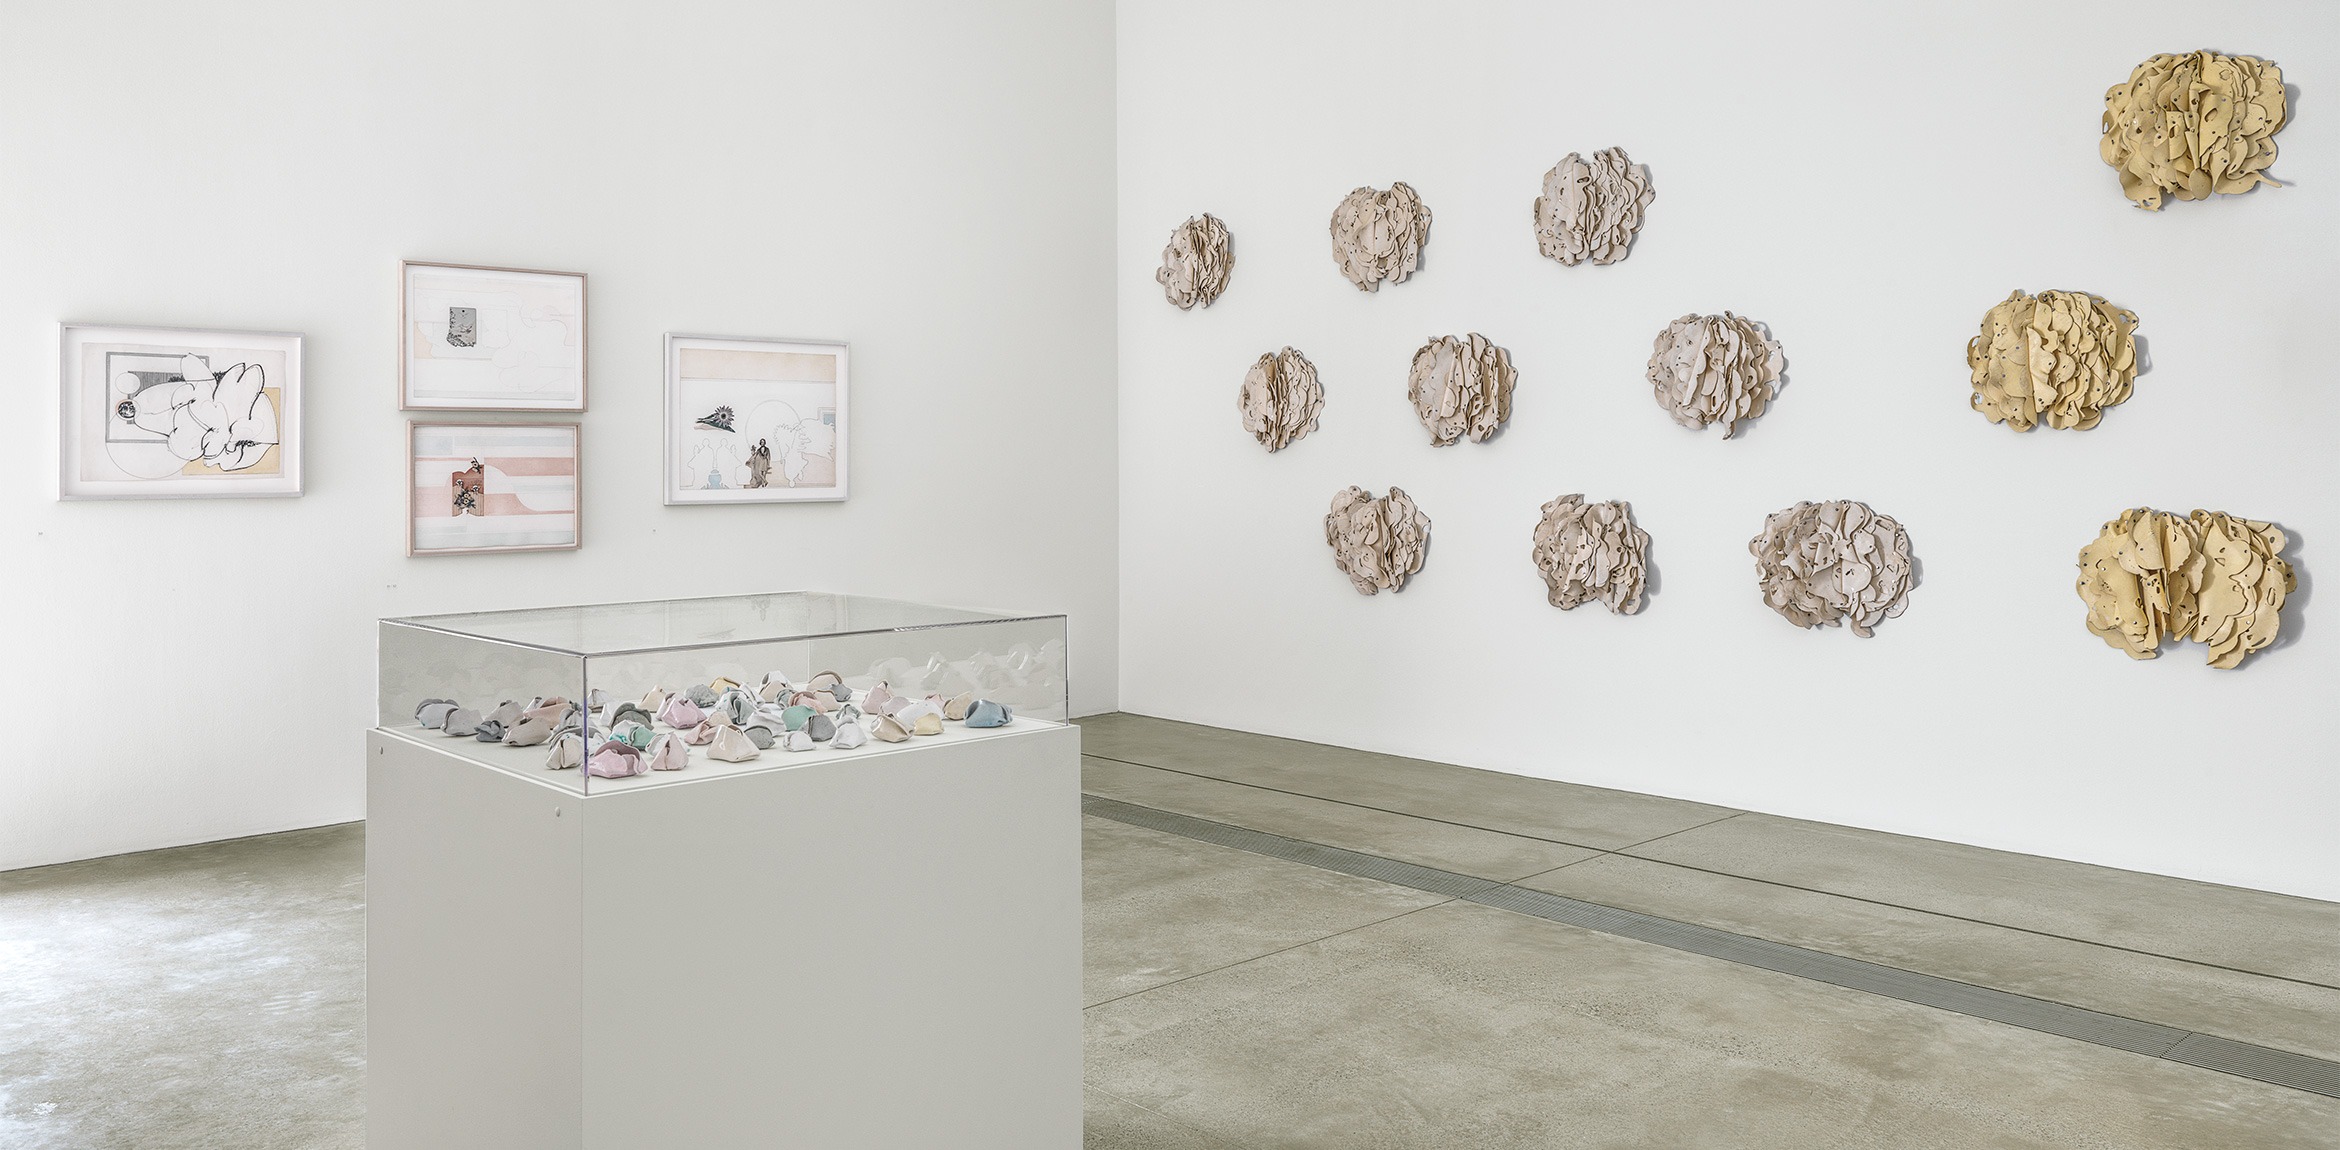 Installation view of the Cube gallery featuring four framed works, latex works, and a vitrine filled with little ceramic sculptures.